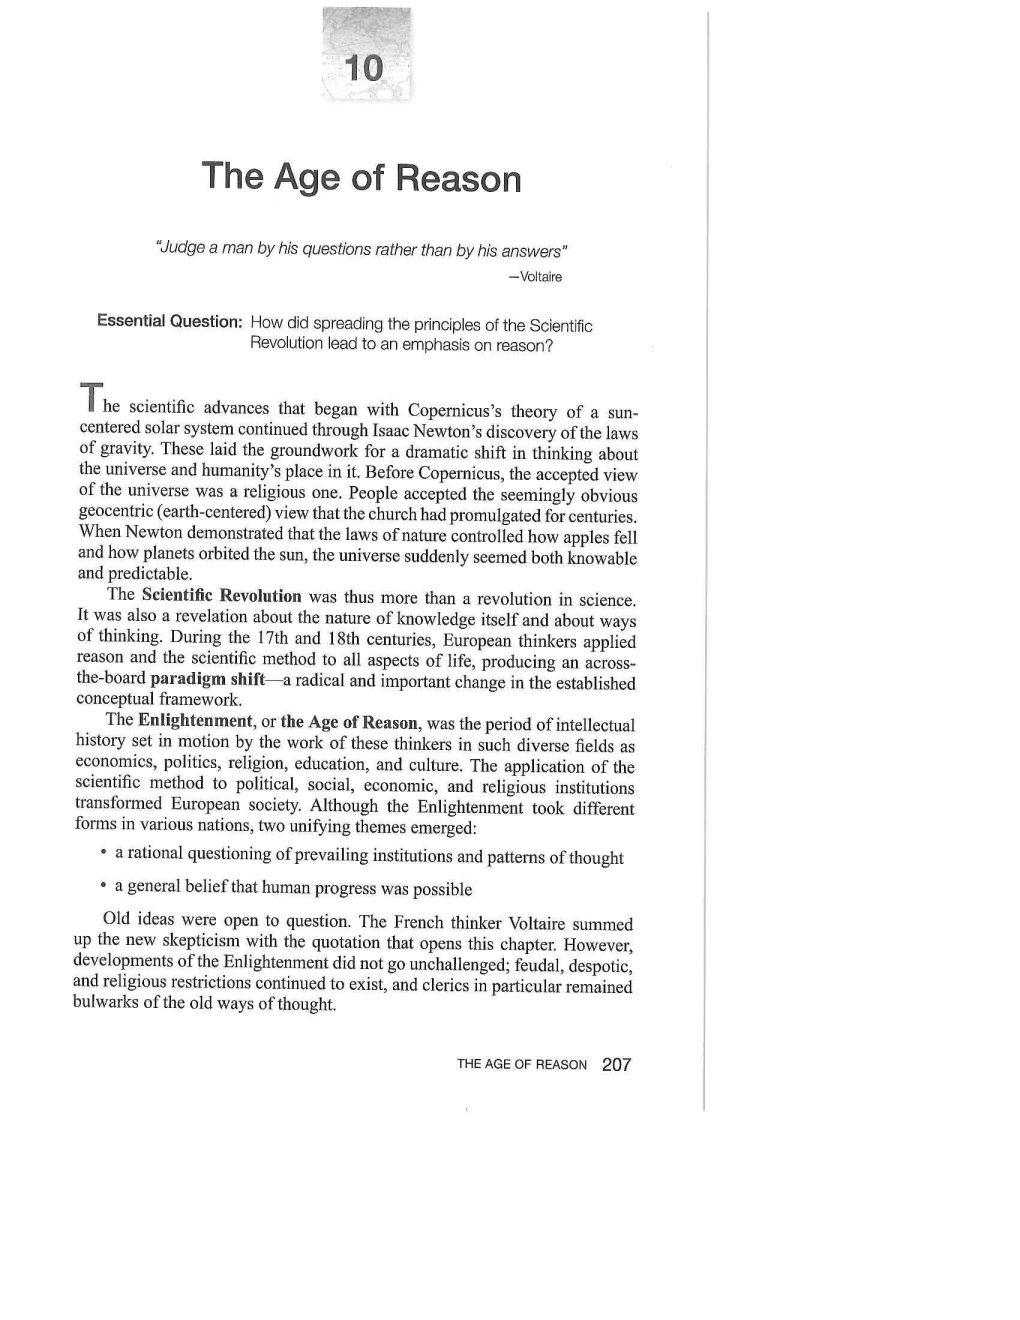 10 the Age of Reason